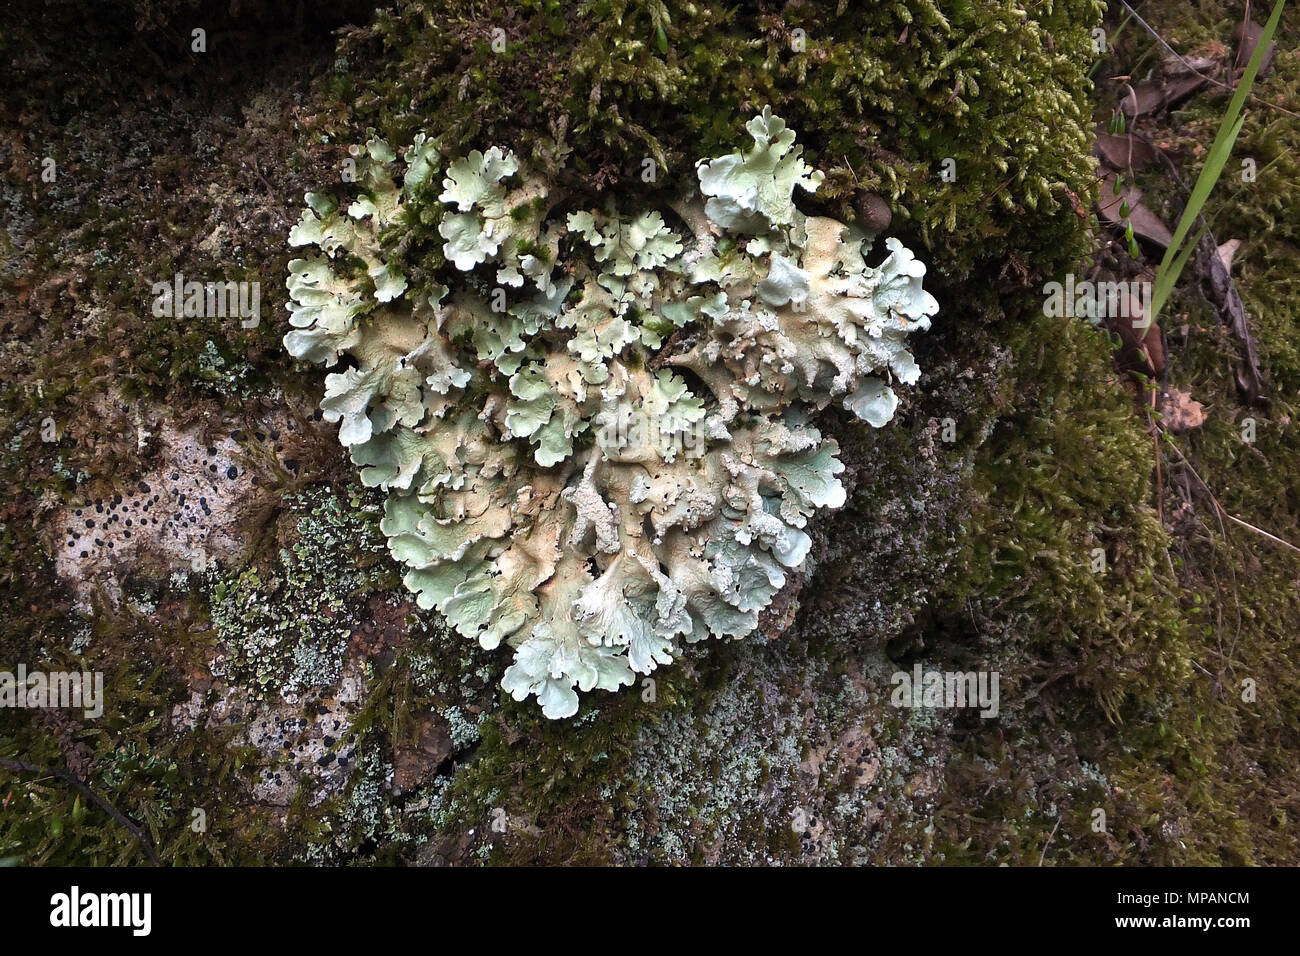 Common greenshield lichen growing in the shape of a heart Stock Photo